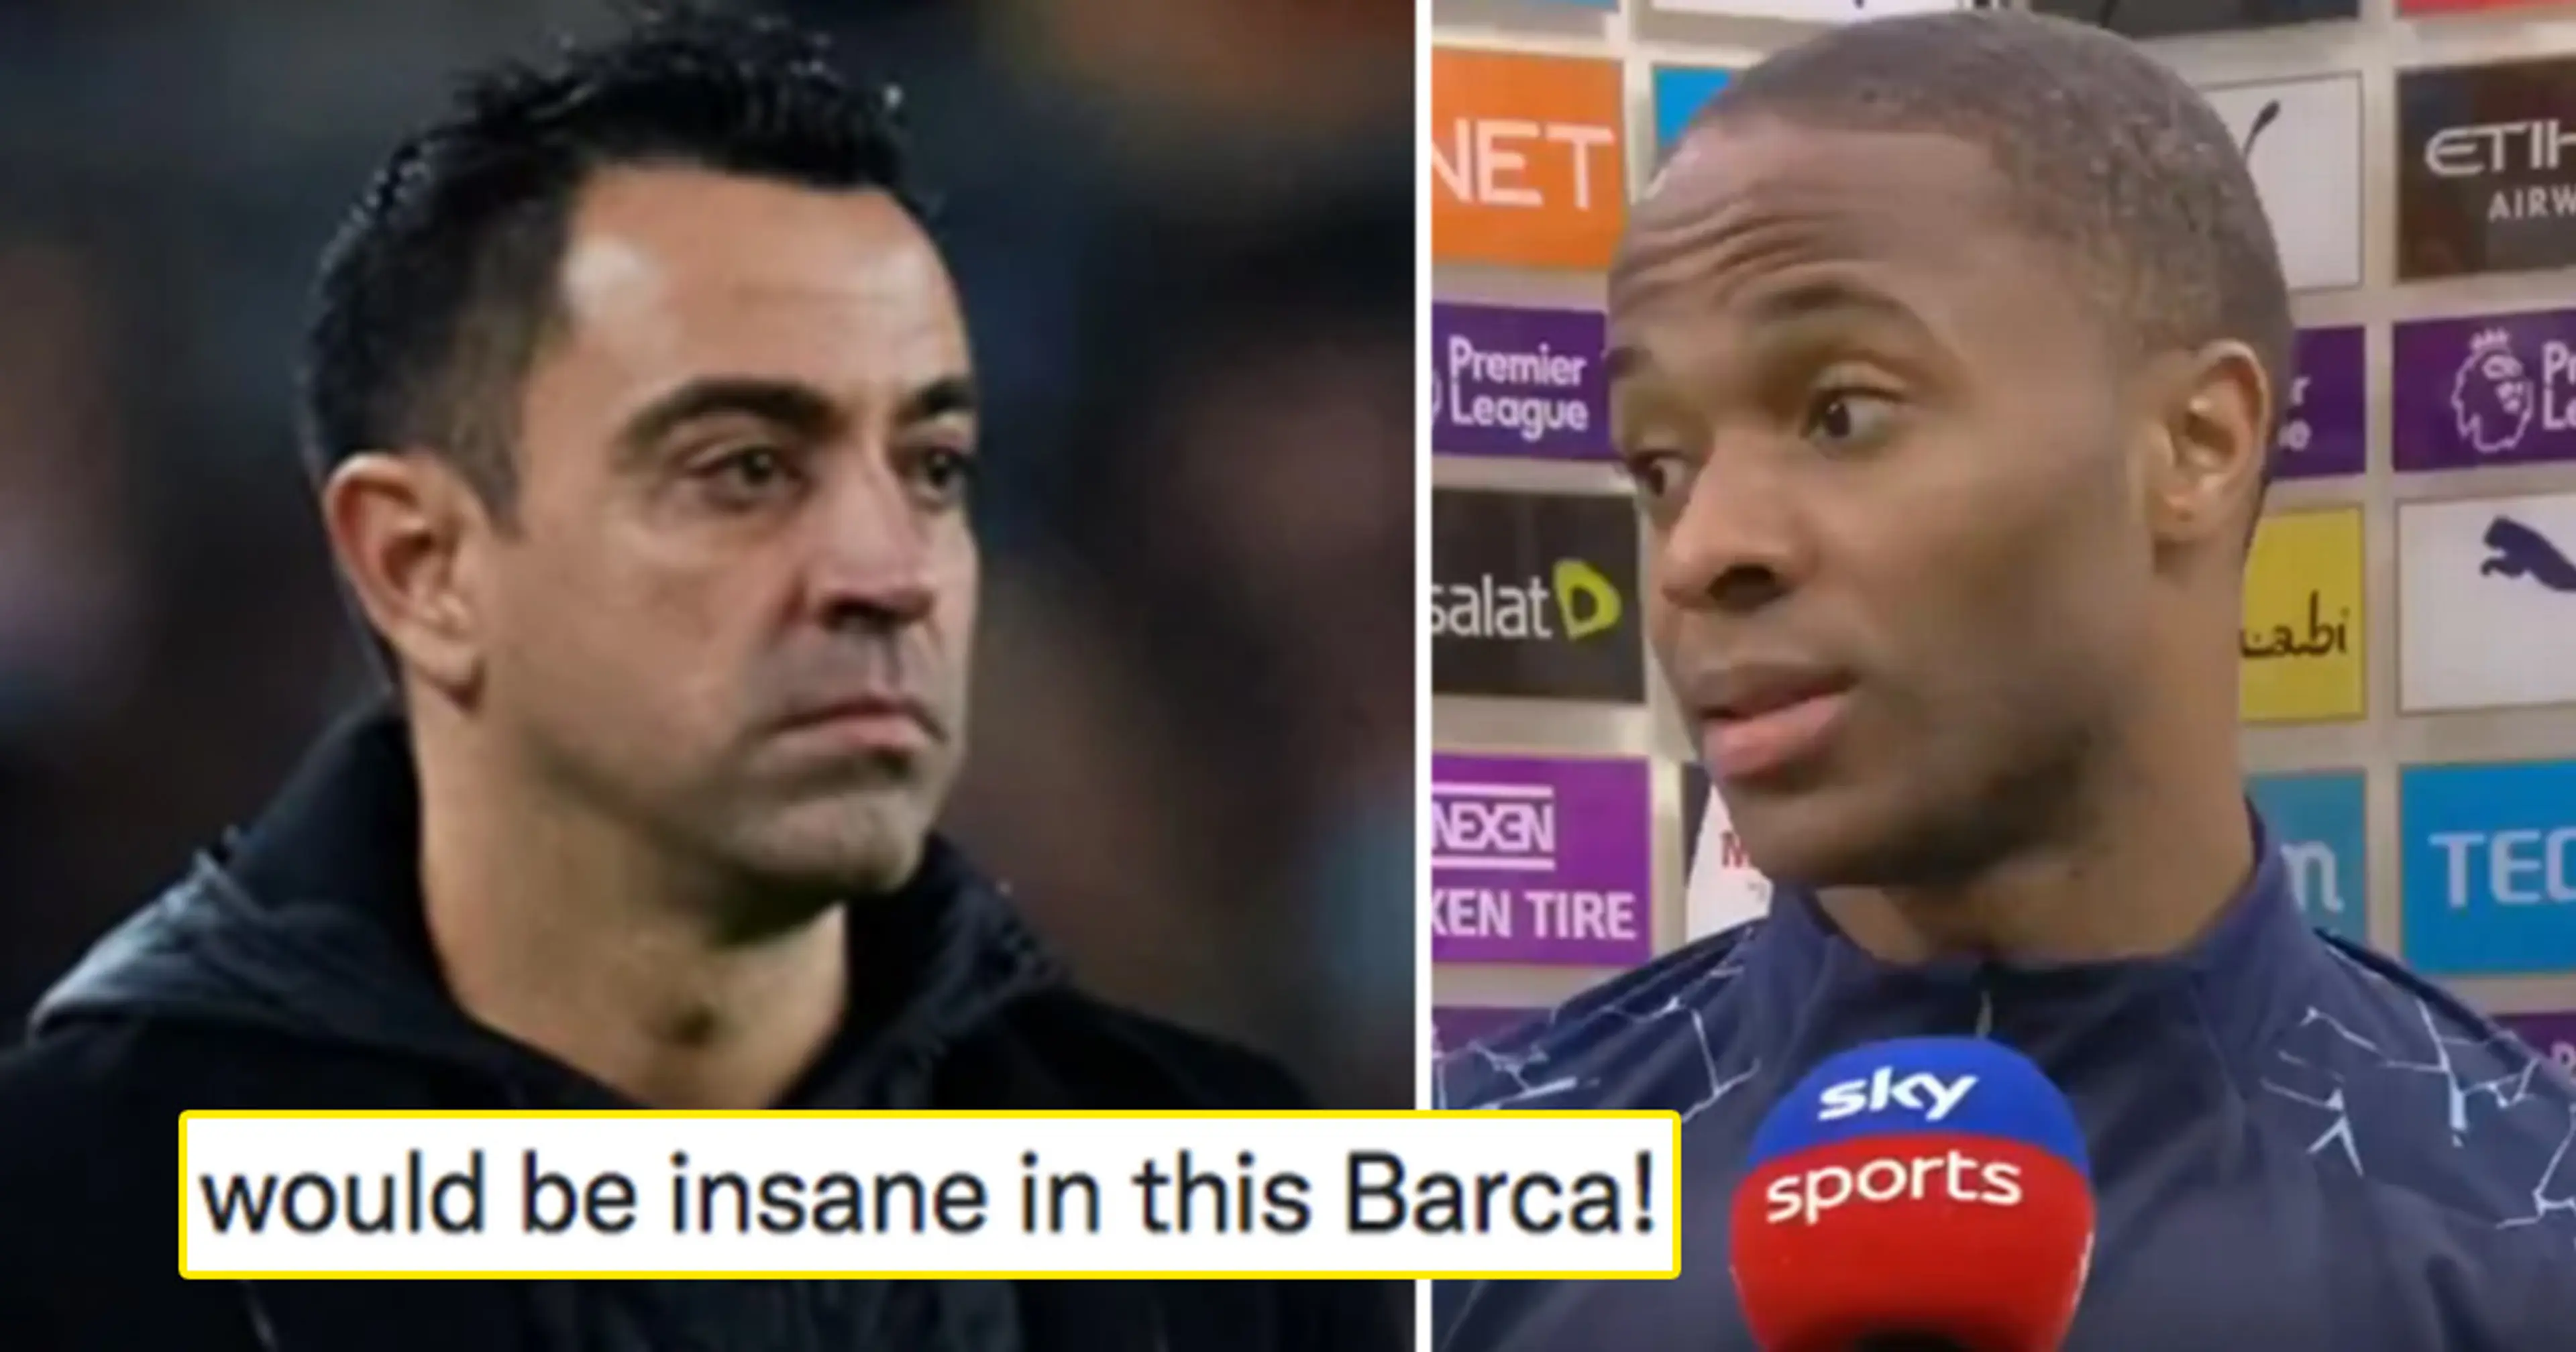 'The exact profile Xavi needs': Some Cules suggest ex-Barca player as Sterling alternative